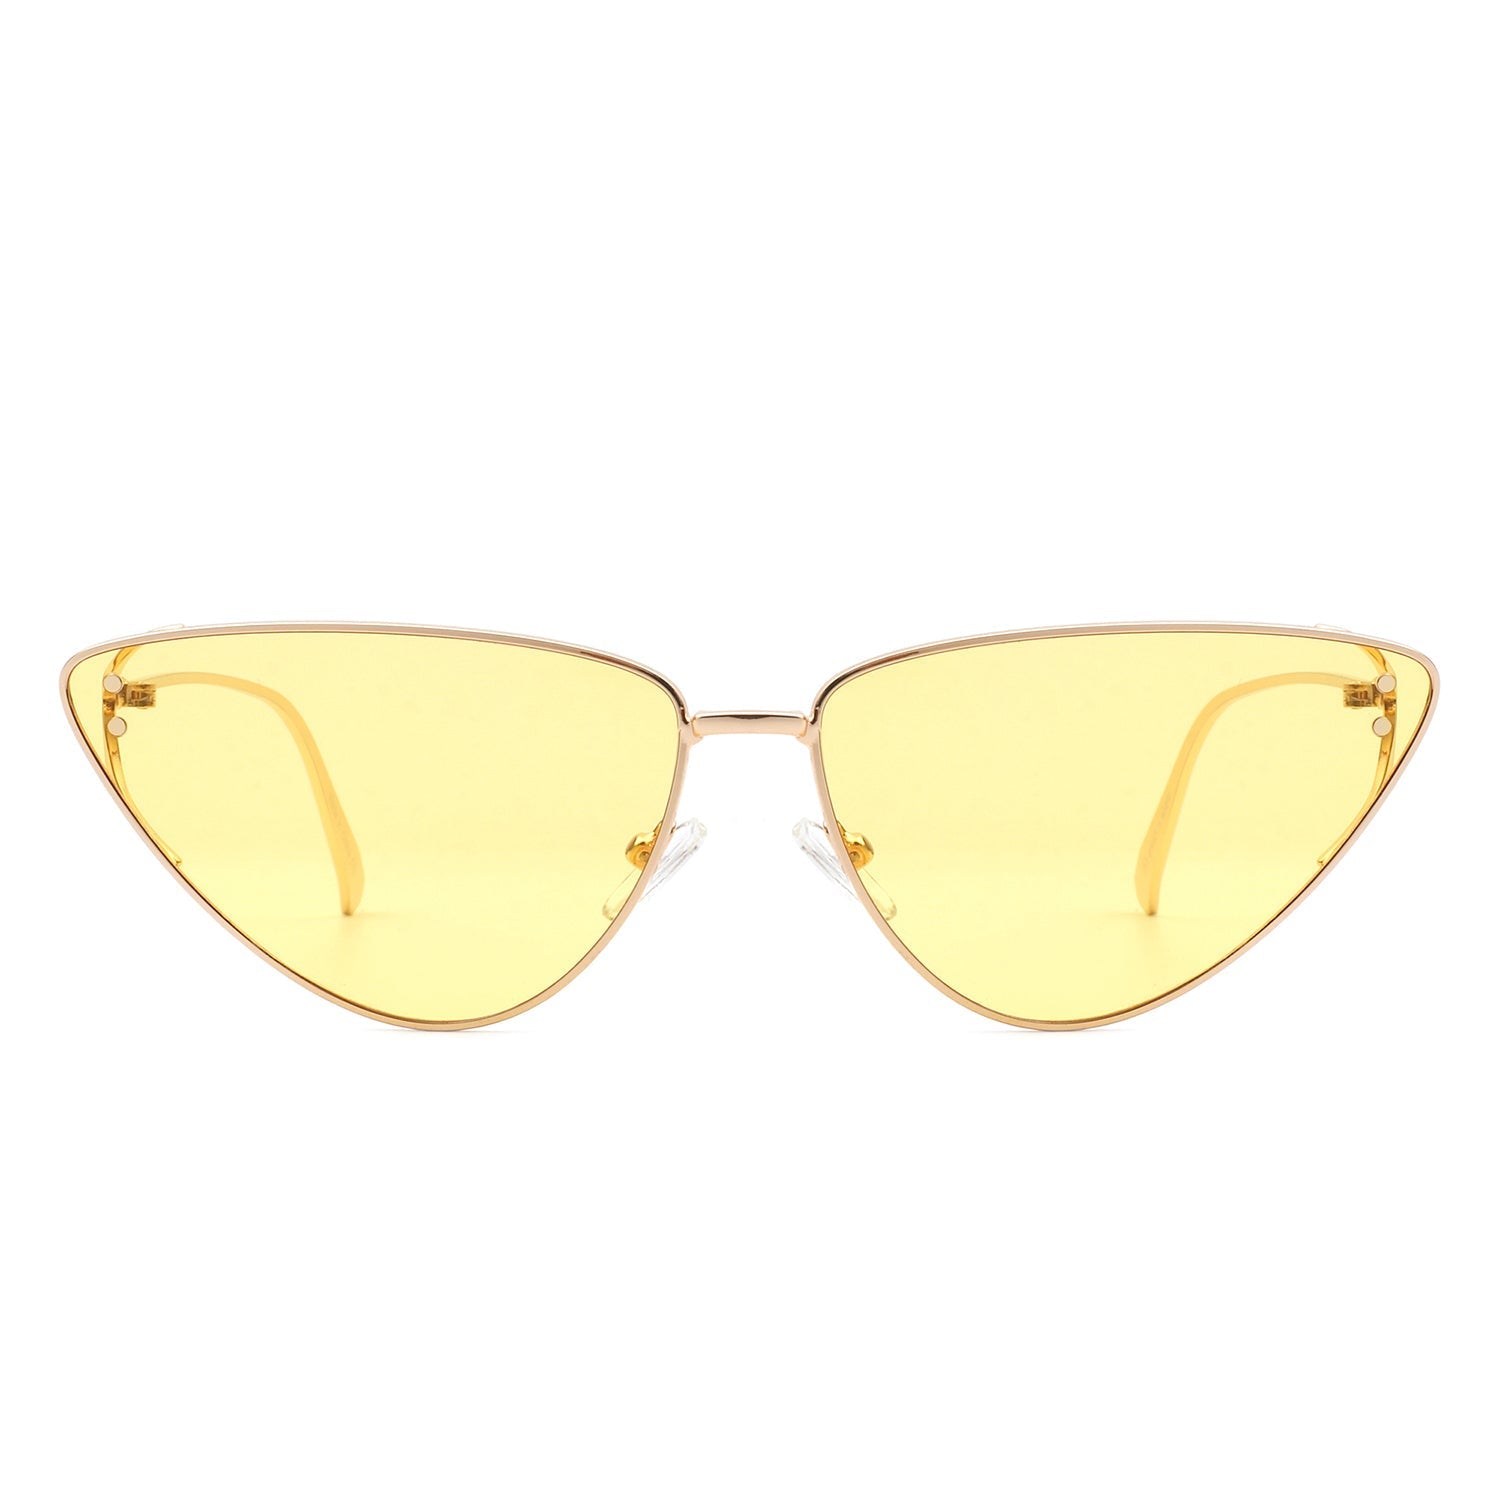 Windflow - Retro Tinted Flat Lens Fashion Cat Eye Sunglasses - KME means the very best